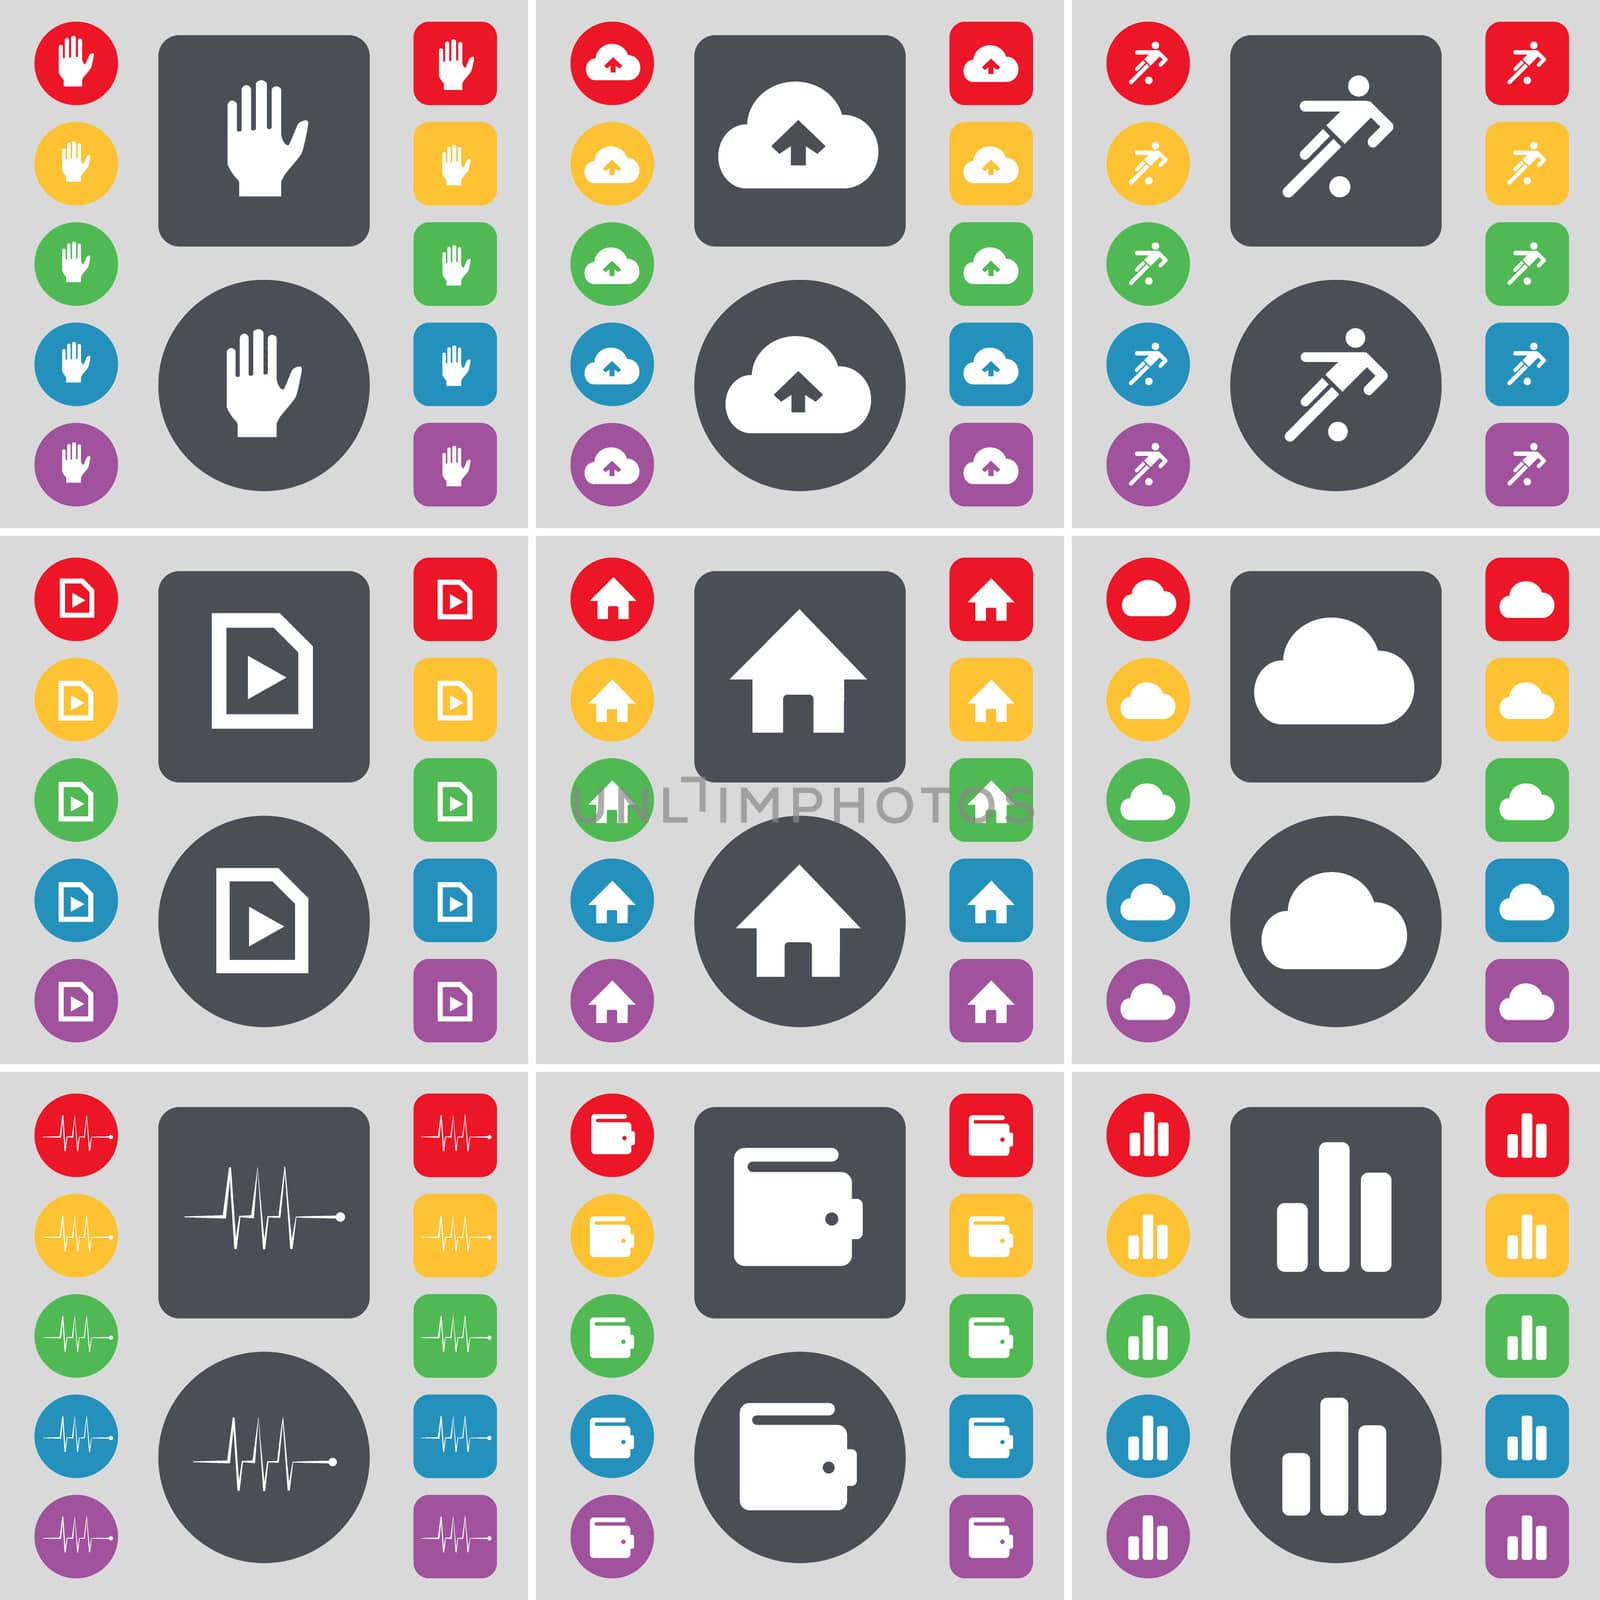 Hand, Cloud, Football, File, House, Cloud, Pulse, Wallet, Diagram icon symbol. A large set of flat, colored buttons for your design.  by serhii_lohvyniuk